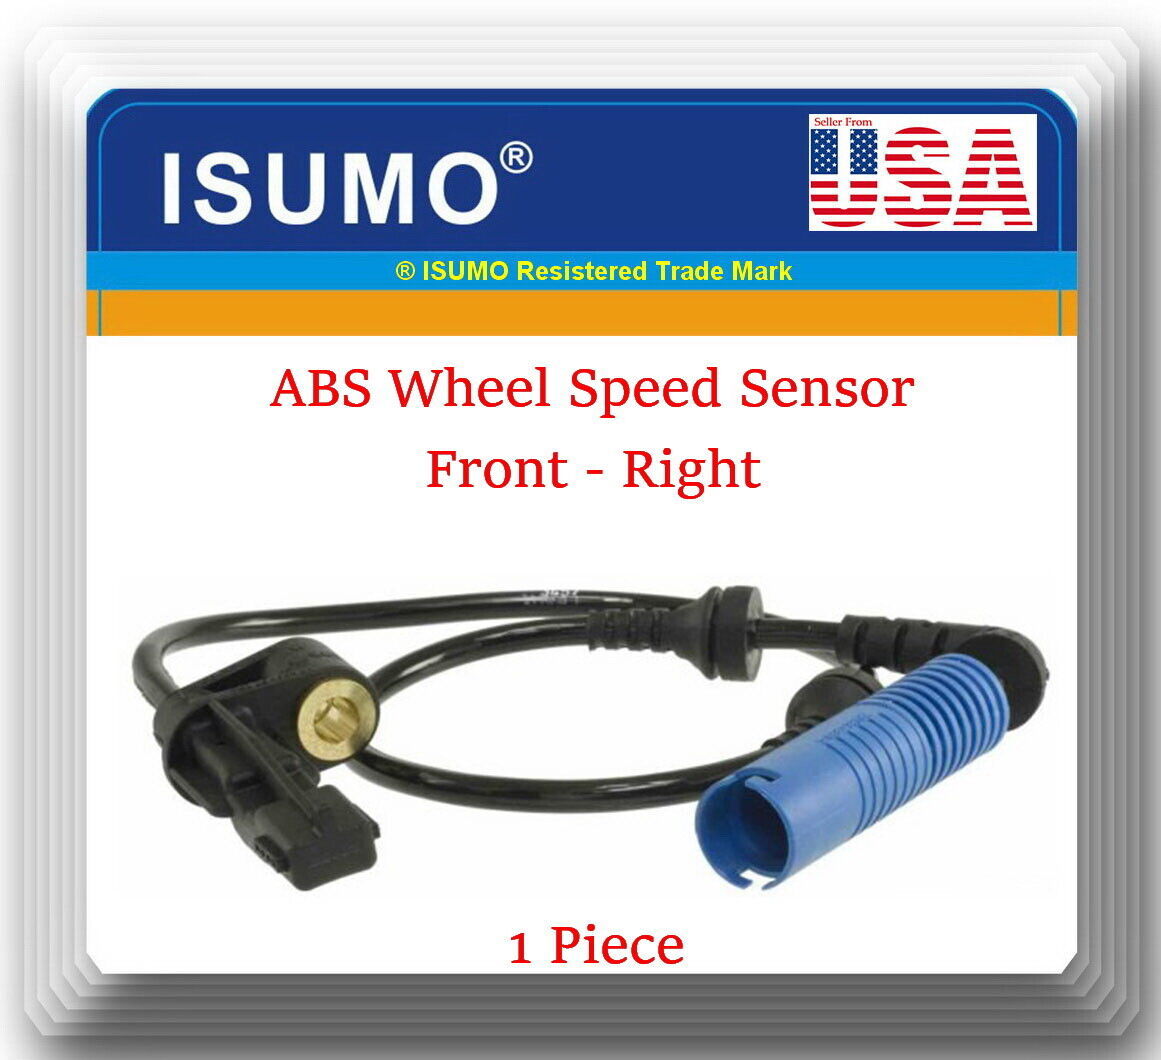 ABS3363FR ABS Wheel Speed Sensor Front Right Fit:BMW 320 325 330 M3 Z4 2001-2008 - $11.60